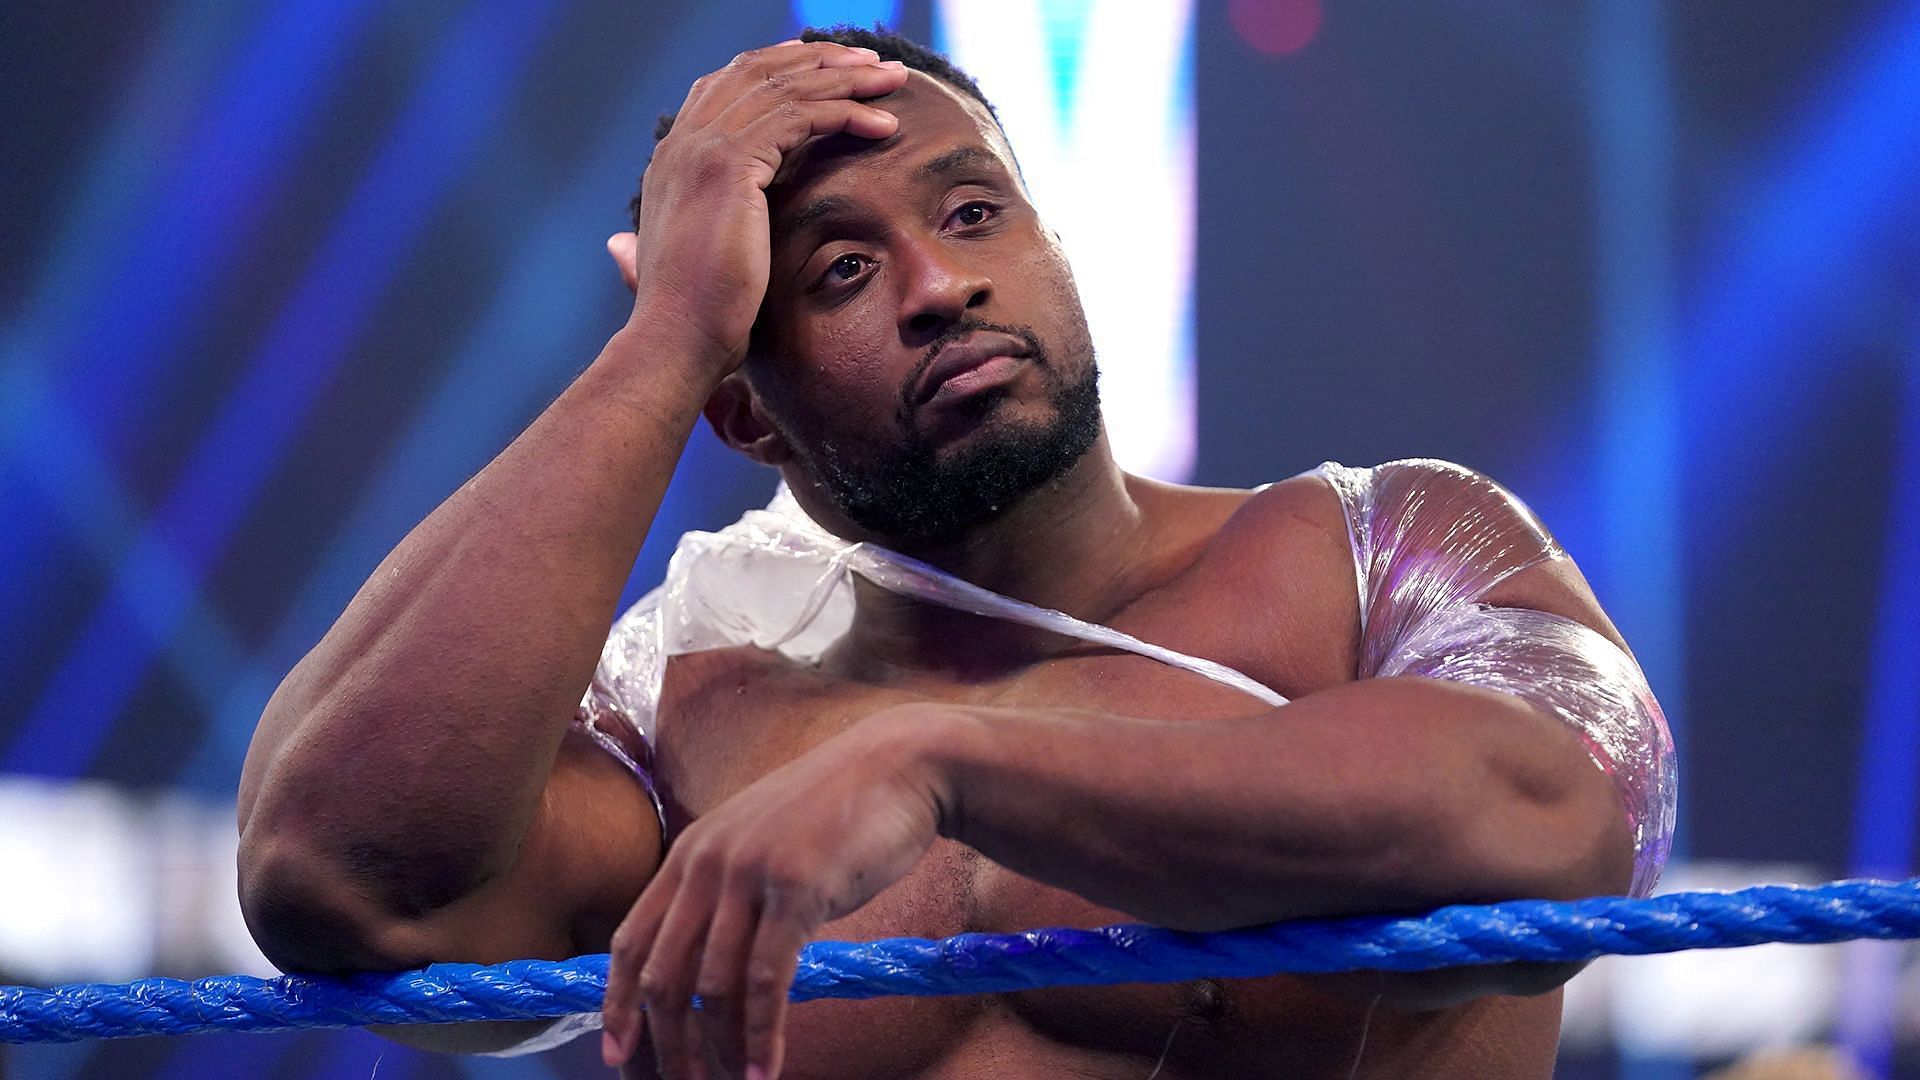 Big E sees all the interaction between WWE and AEW stars on social media.